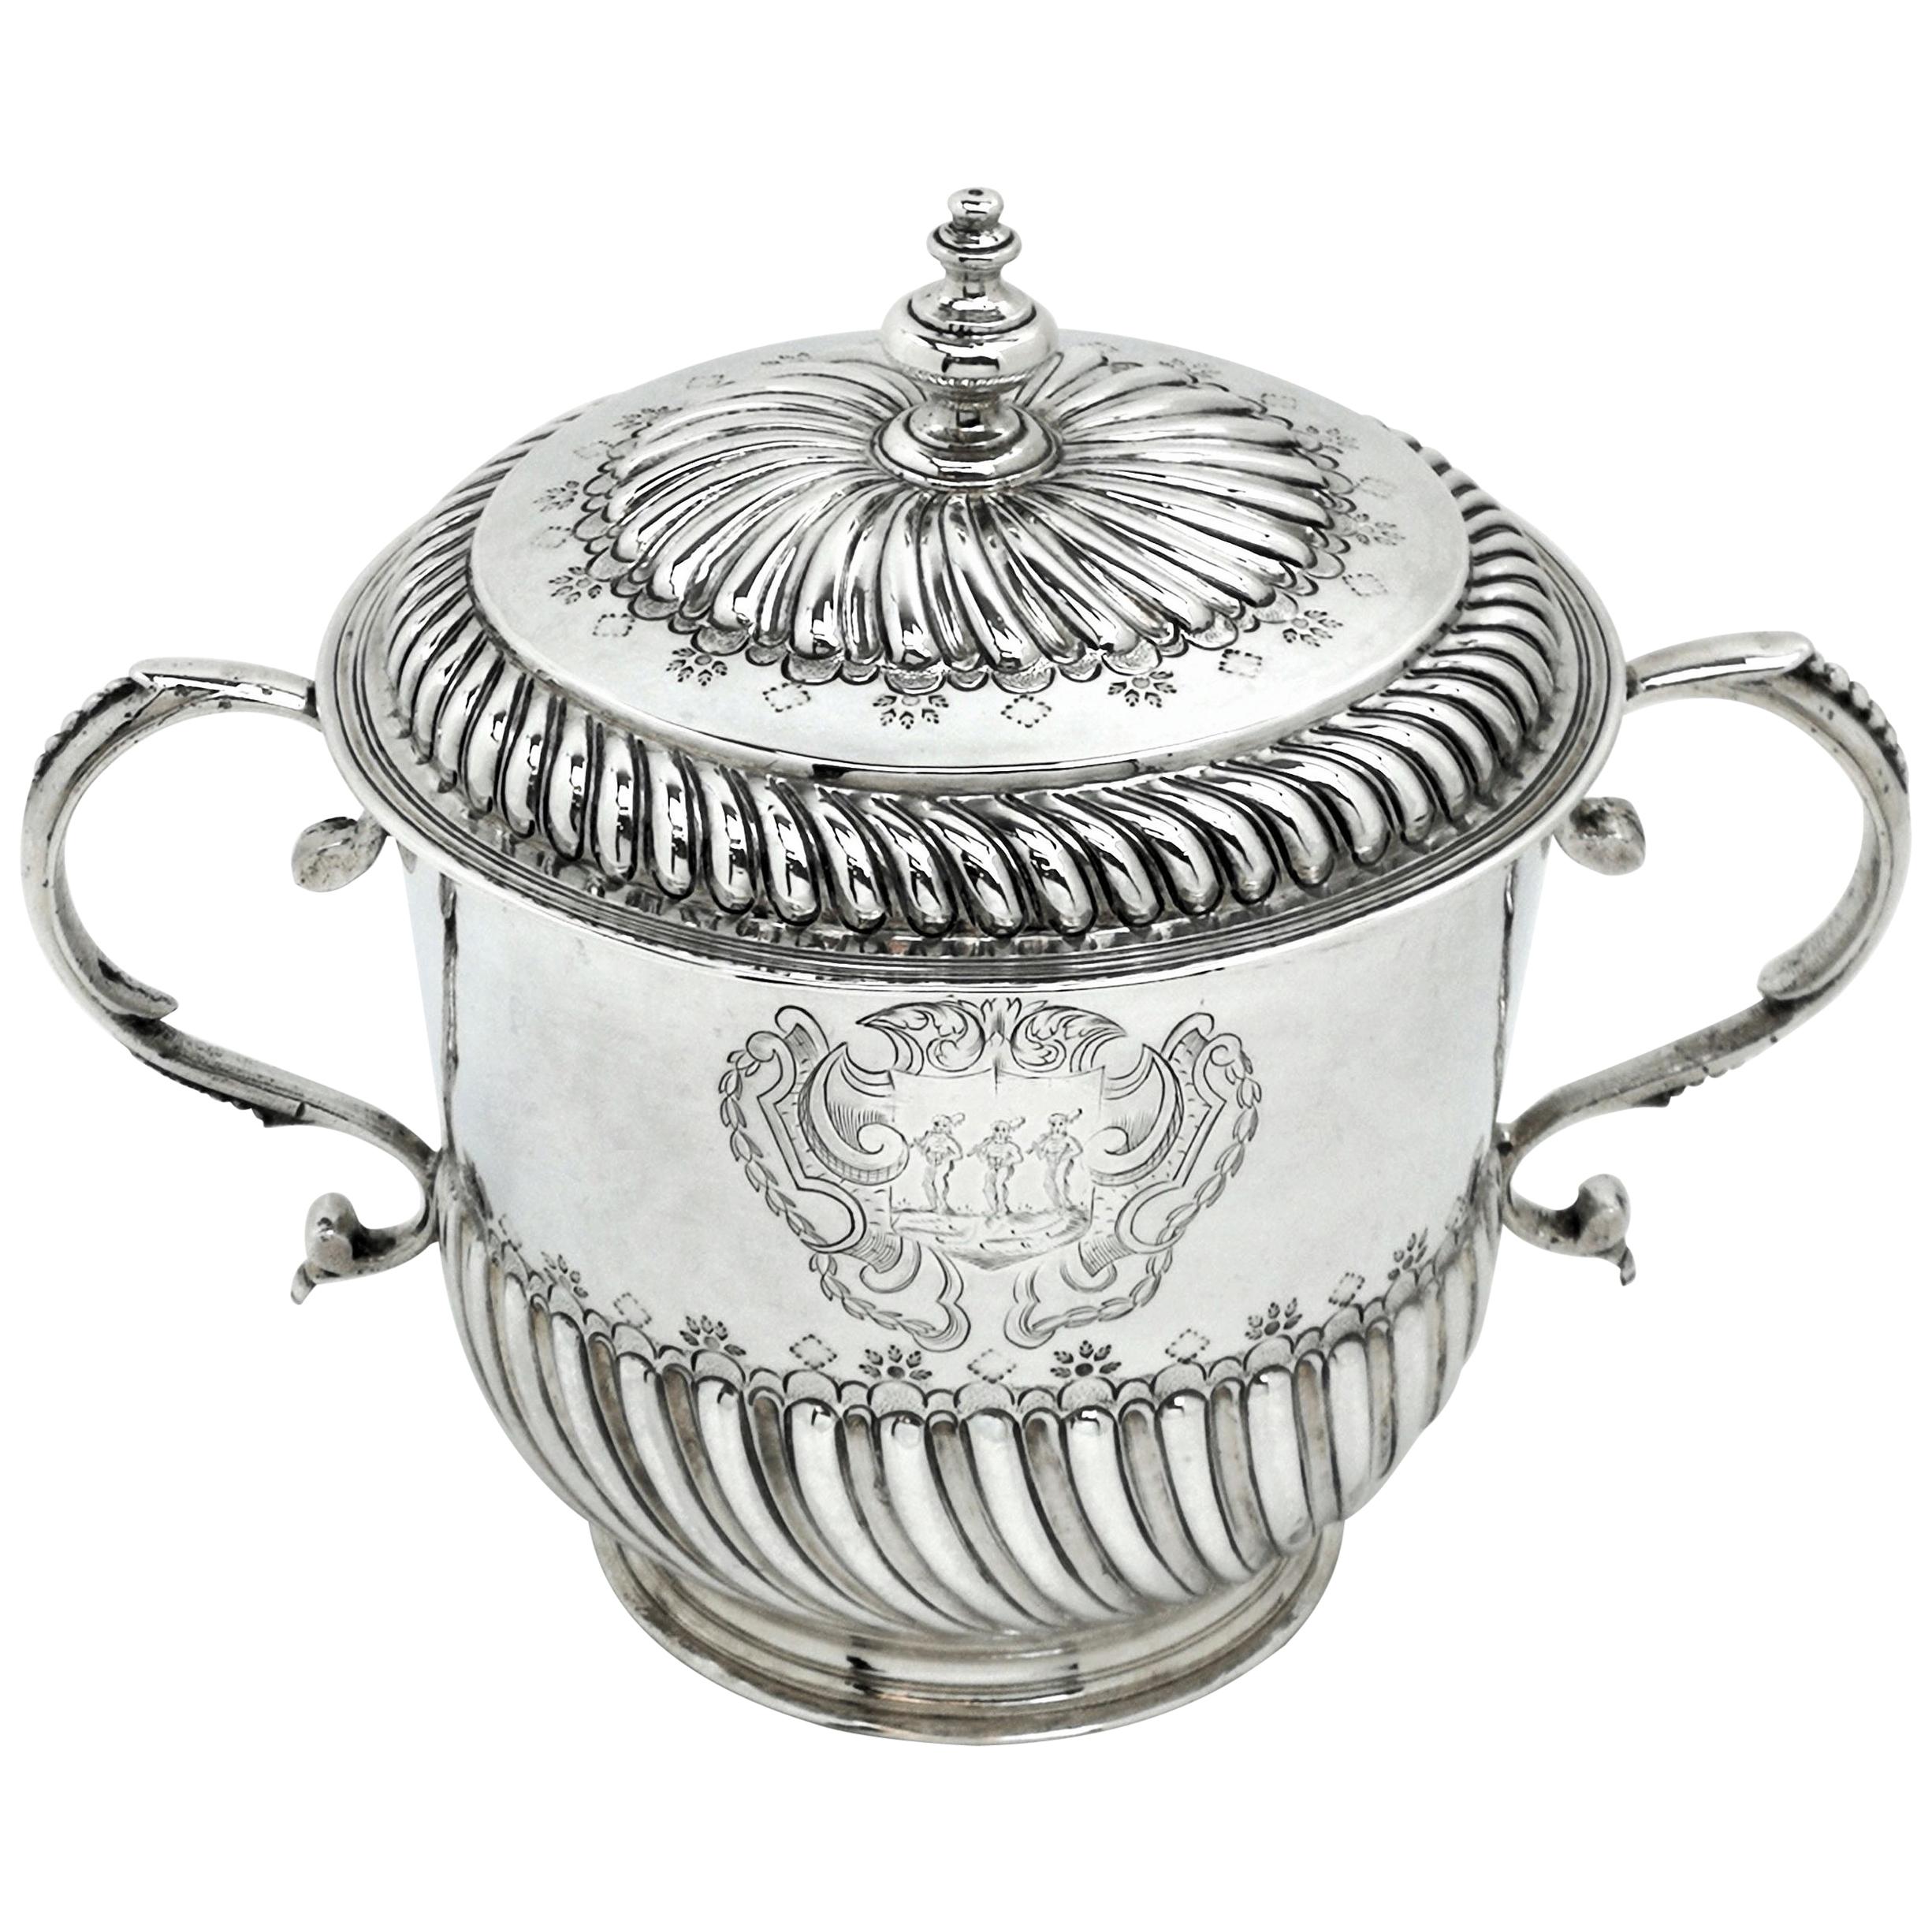 William III Sterling Silver Porringer and Lid / Cup and Cover 1695, 17th Century